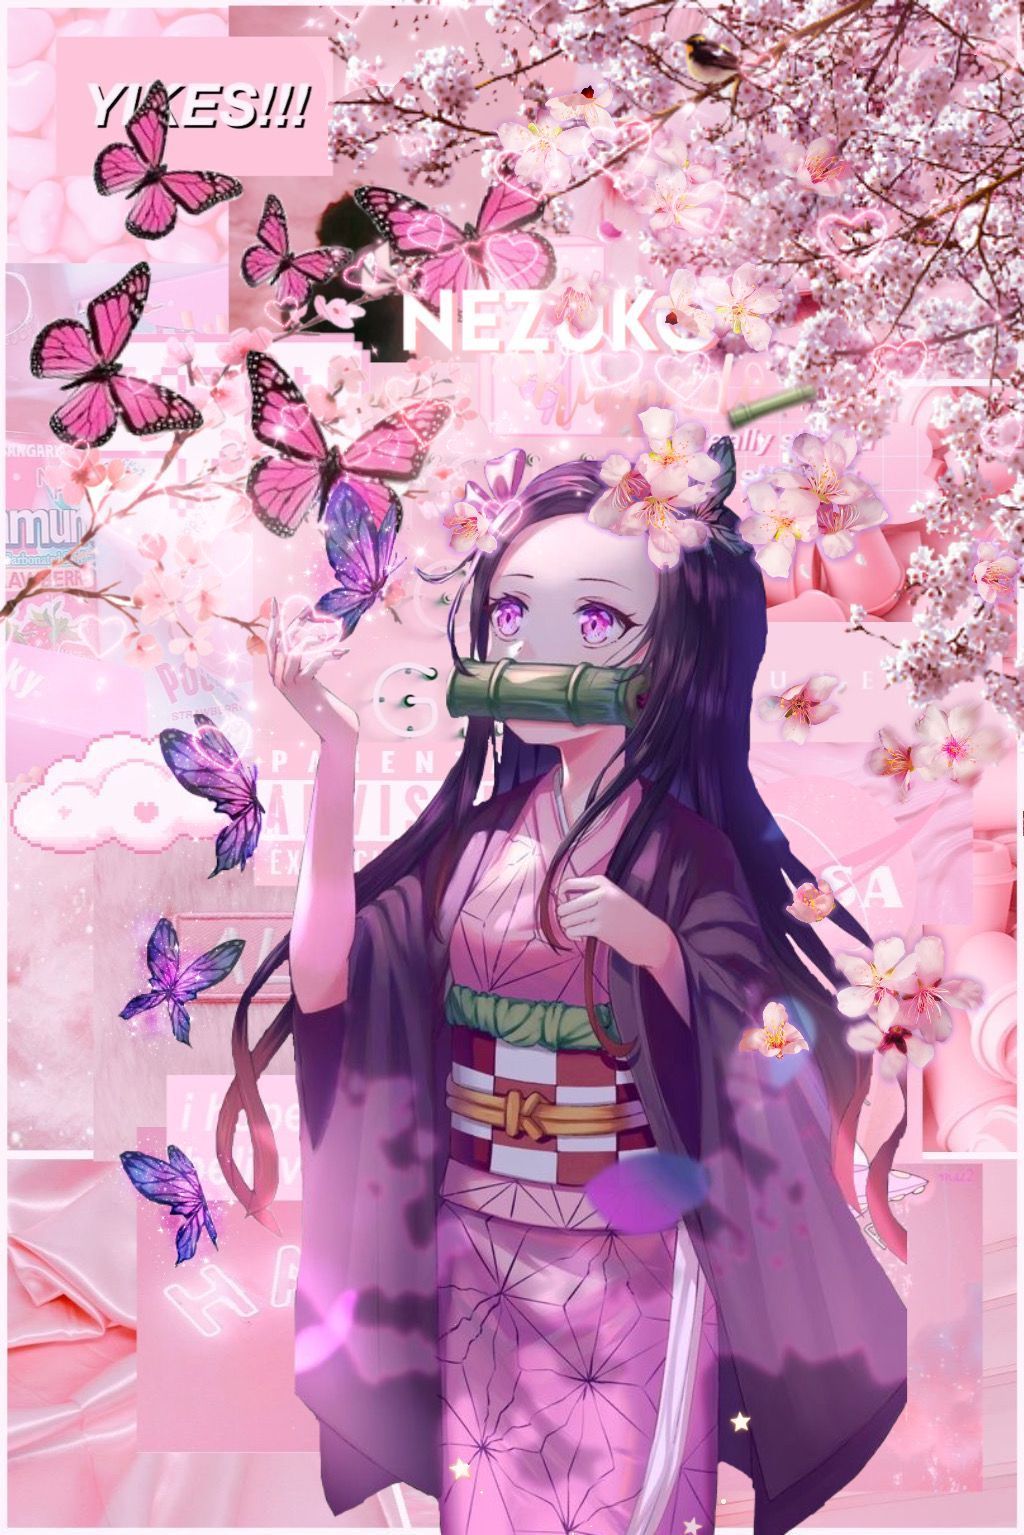 A poster with an asian woman in pink - Nezuko